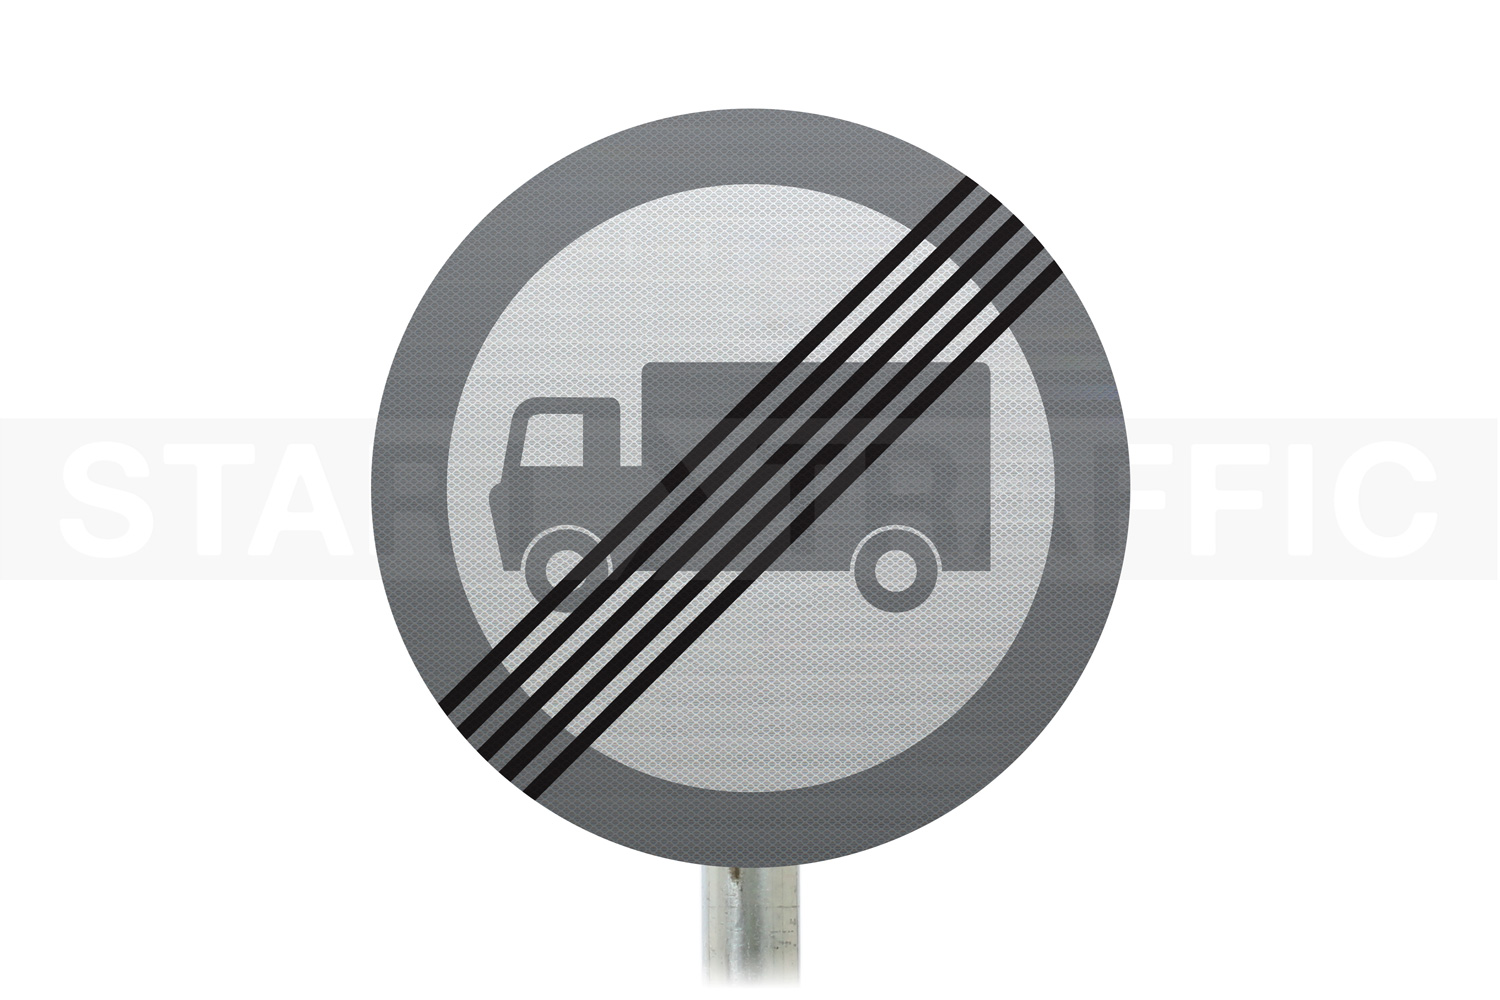 End of Prohibition of Goods Vehicles Post Mounted Sign